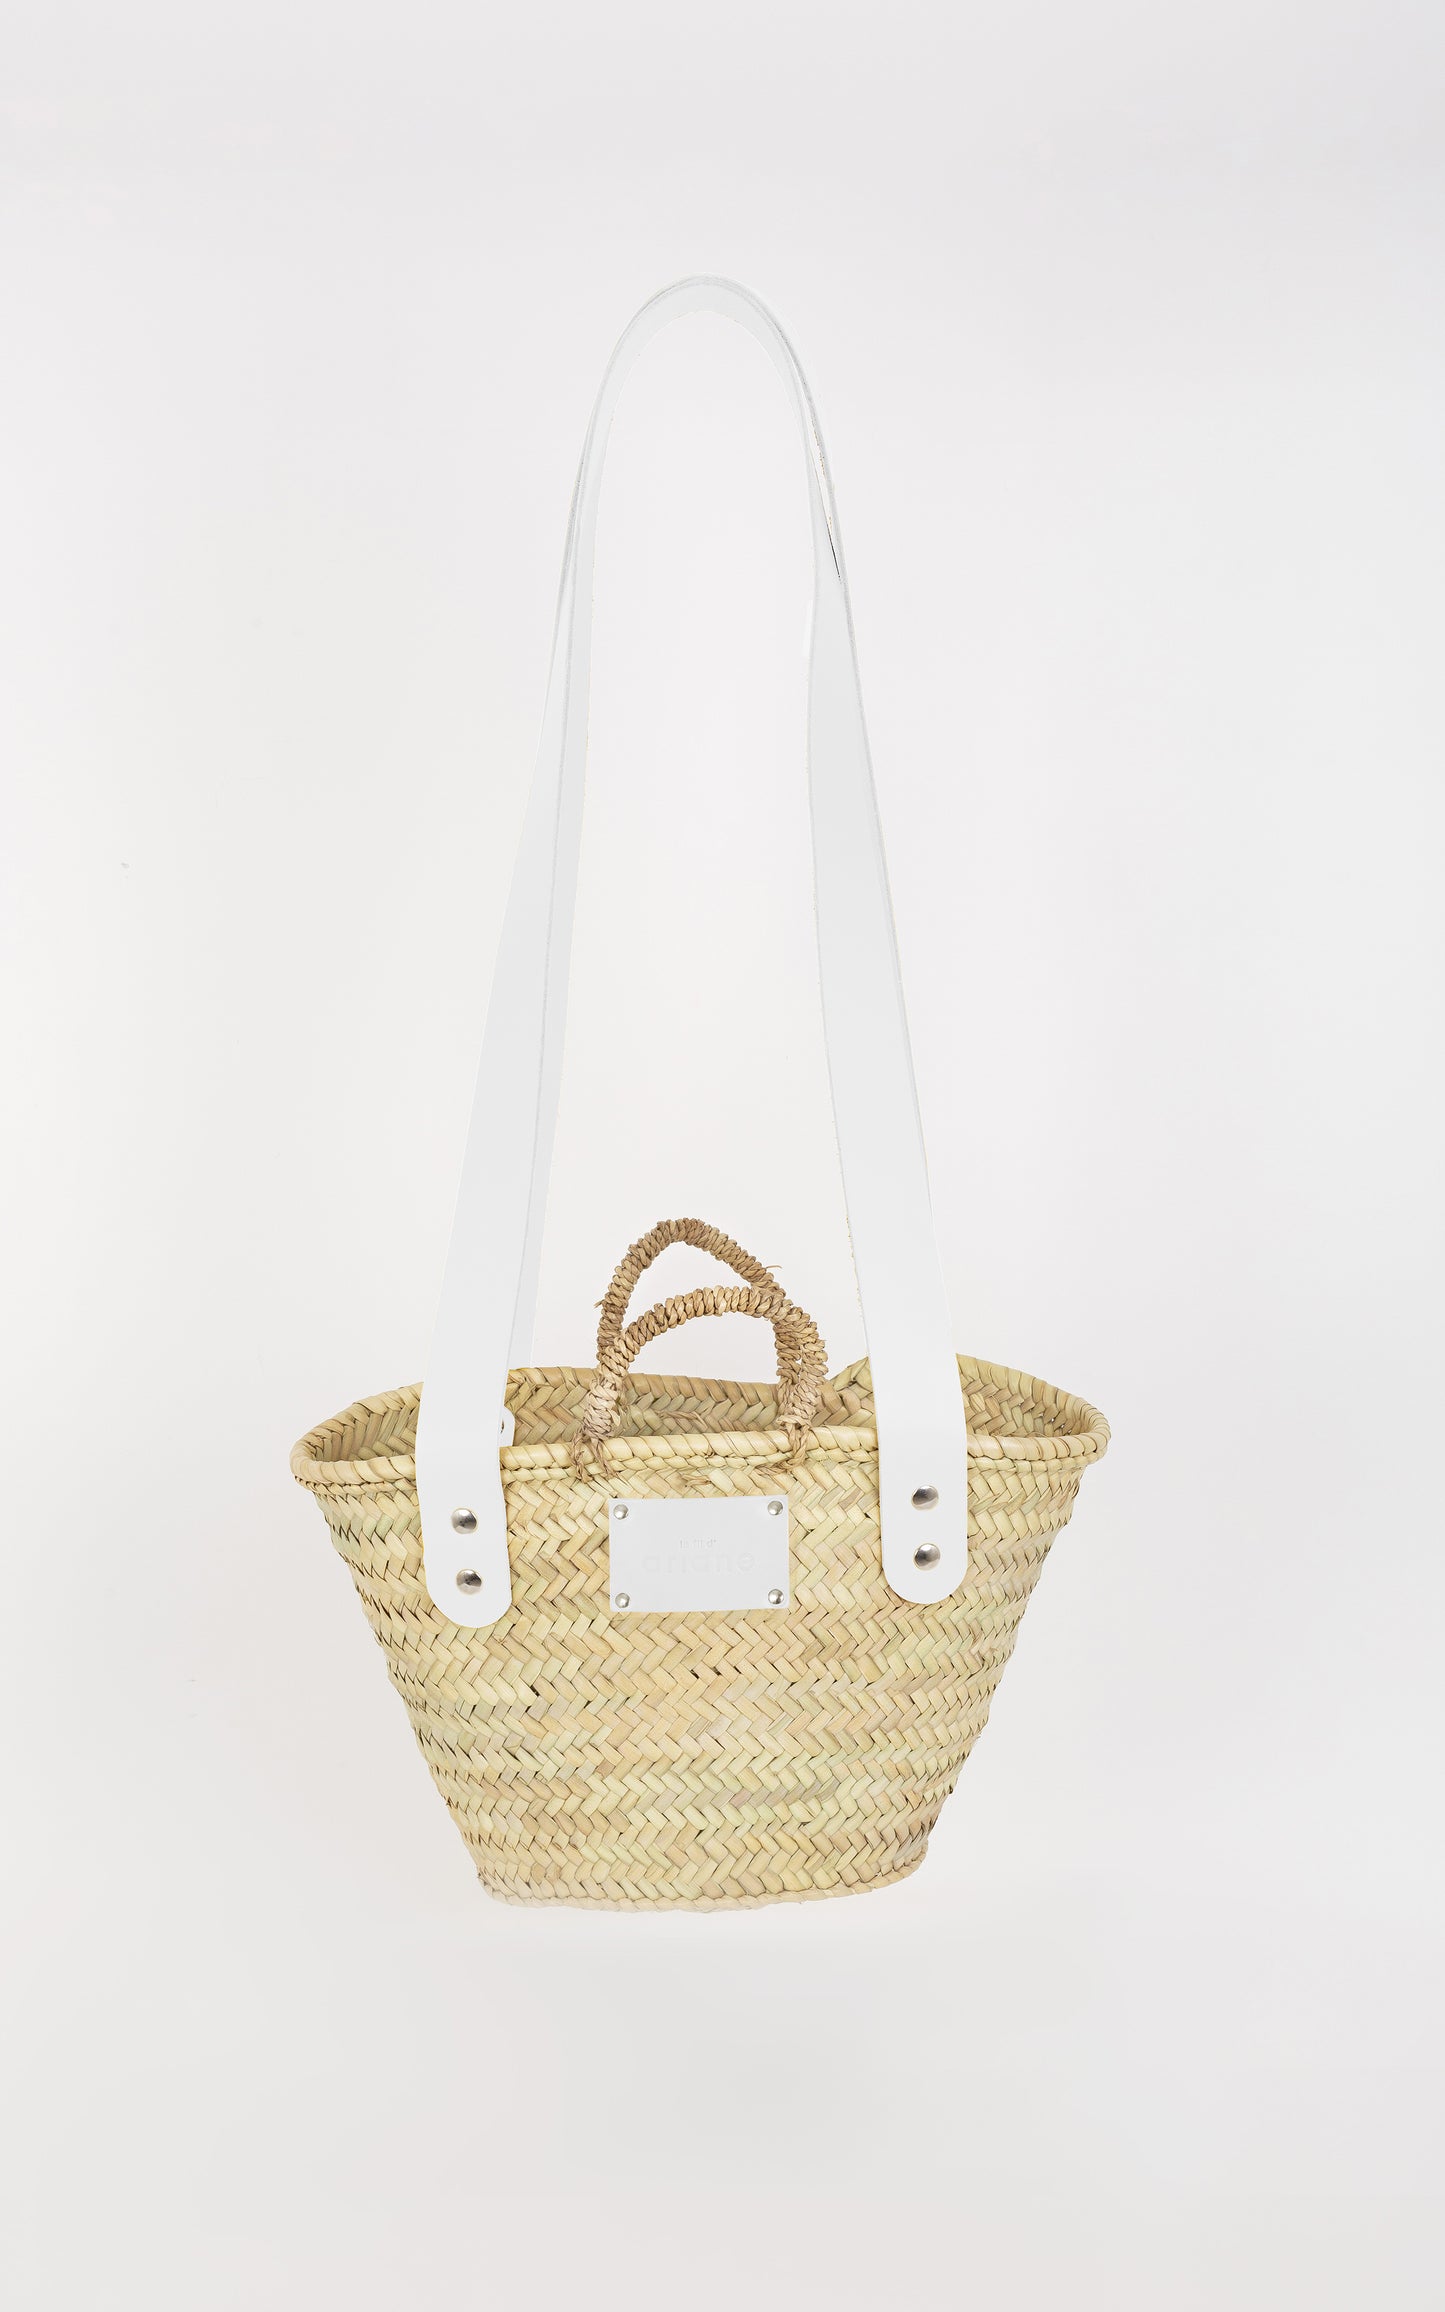 Panier THESEE - Taille S - Anses larges blanches